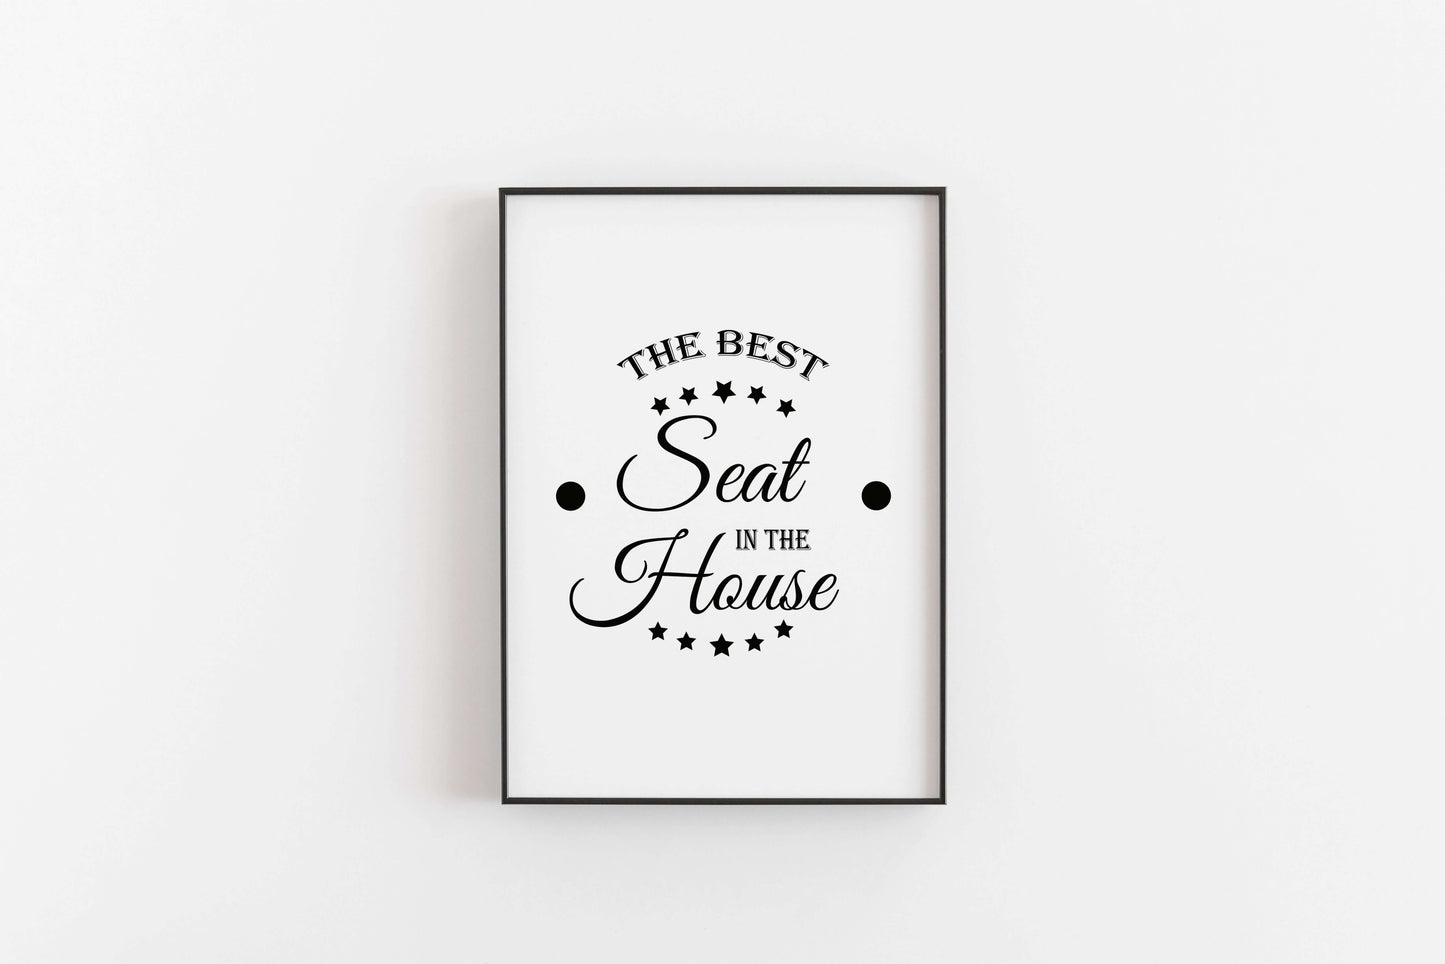 The Best Seat in The House Print, Bathroom Print, Bathroom Decor, Toilet Art, Bathroom Prints, Bathroom Wall Art, Home Print, Funny Bathroom Prints